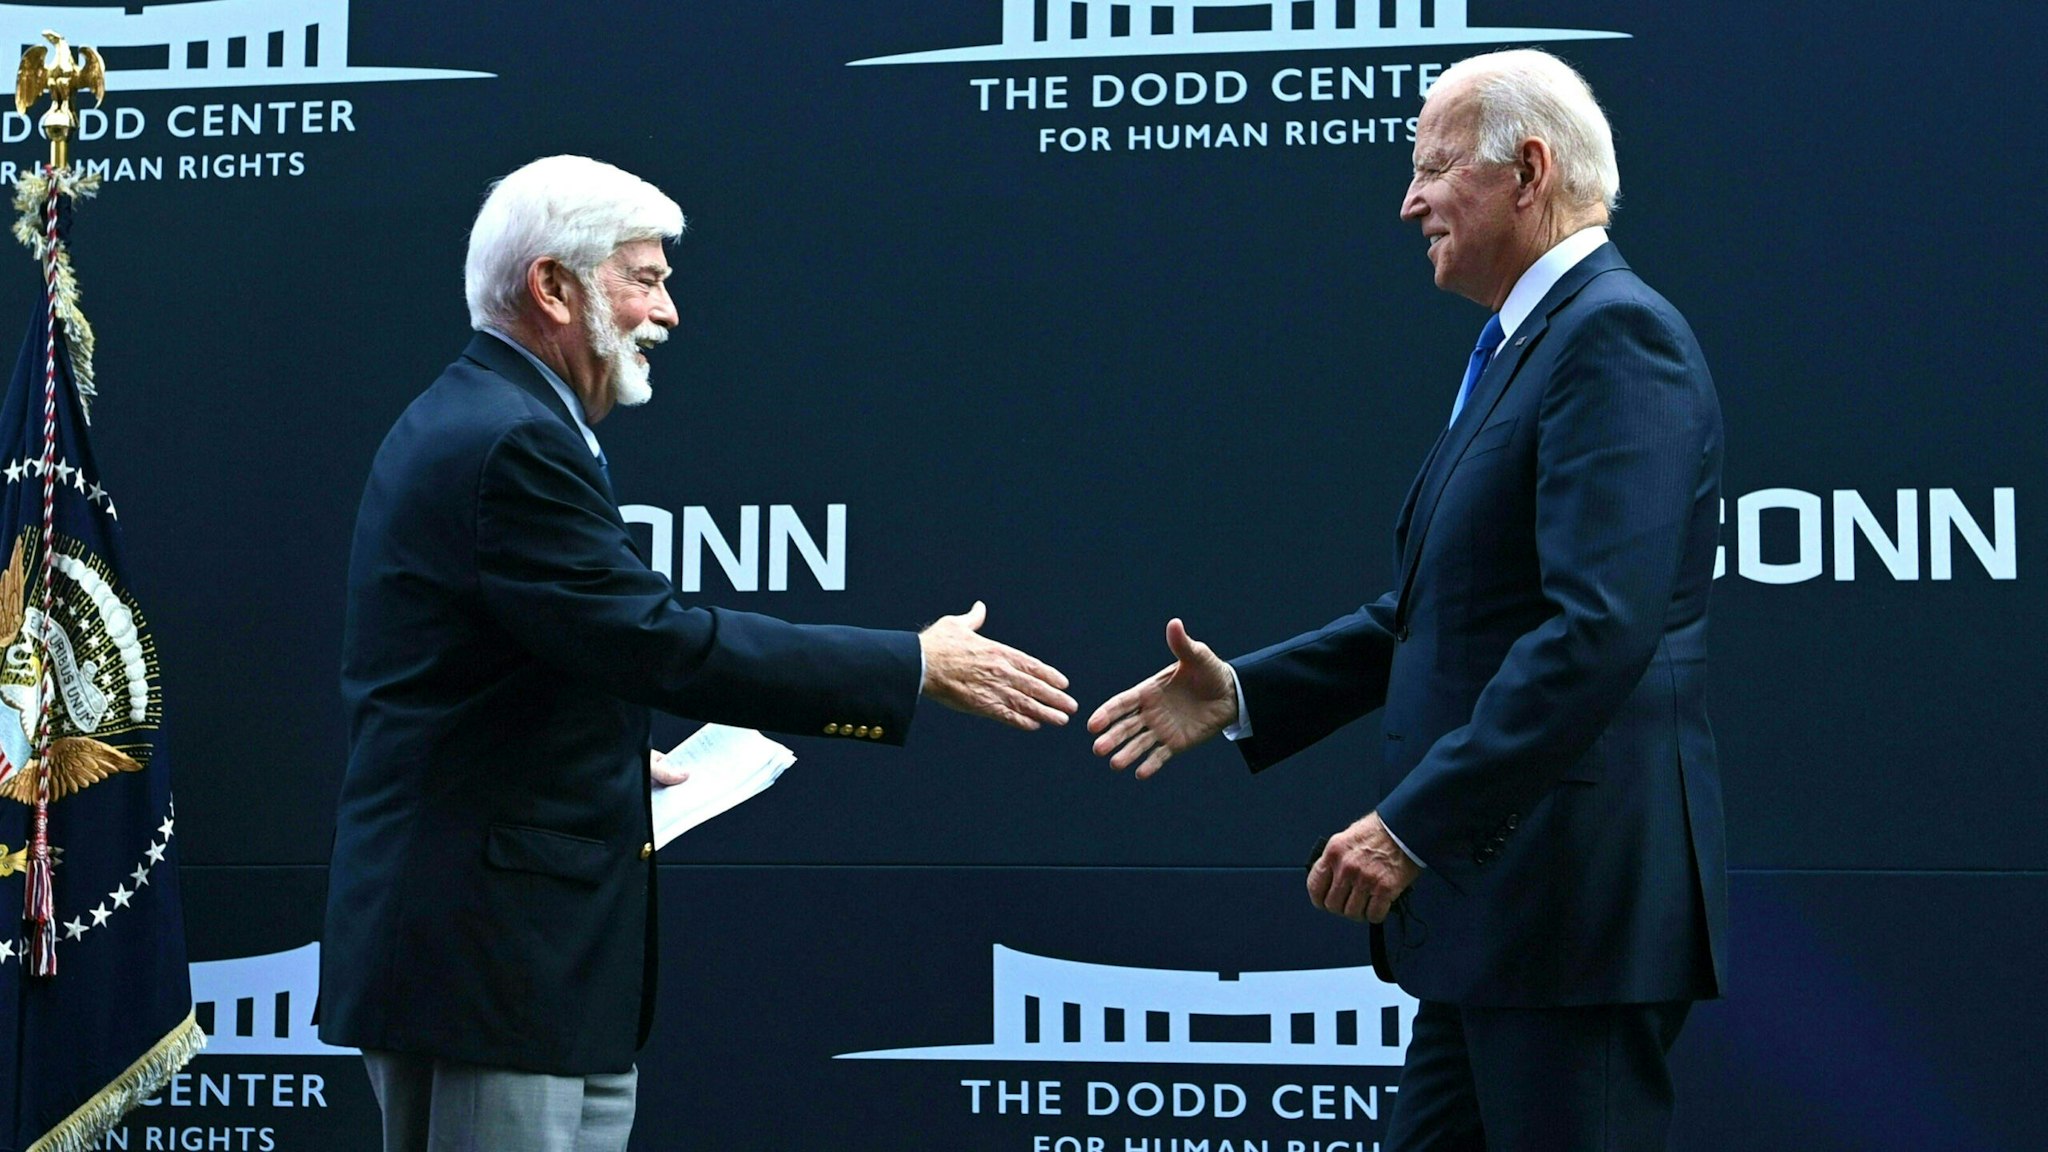 Former US Senator Chris Dodd (D-CT) greets US President Joe Biden (R) at the dedication of the Dodd Center for Human Rights at the University of Connecticut on October 15, 2021 in Storrs, Connecticut.